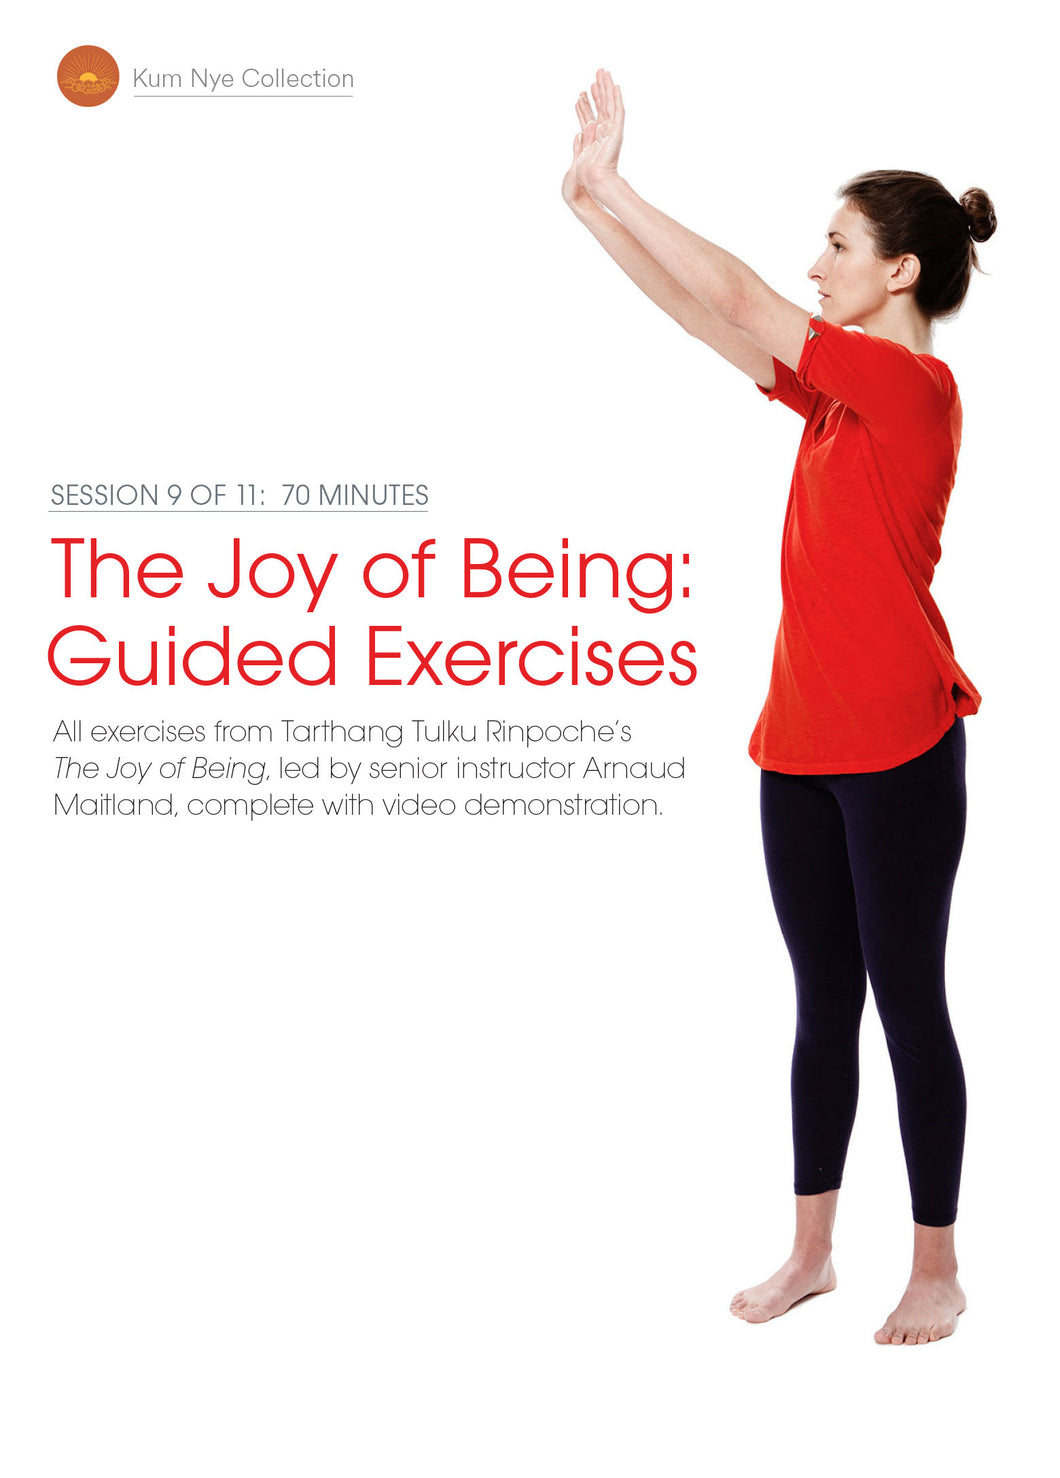 The Joy of Being; Guided Exercises, Session 9